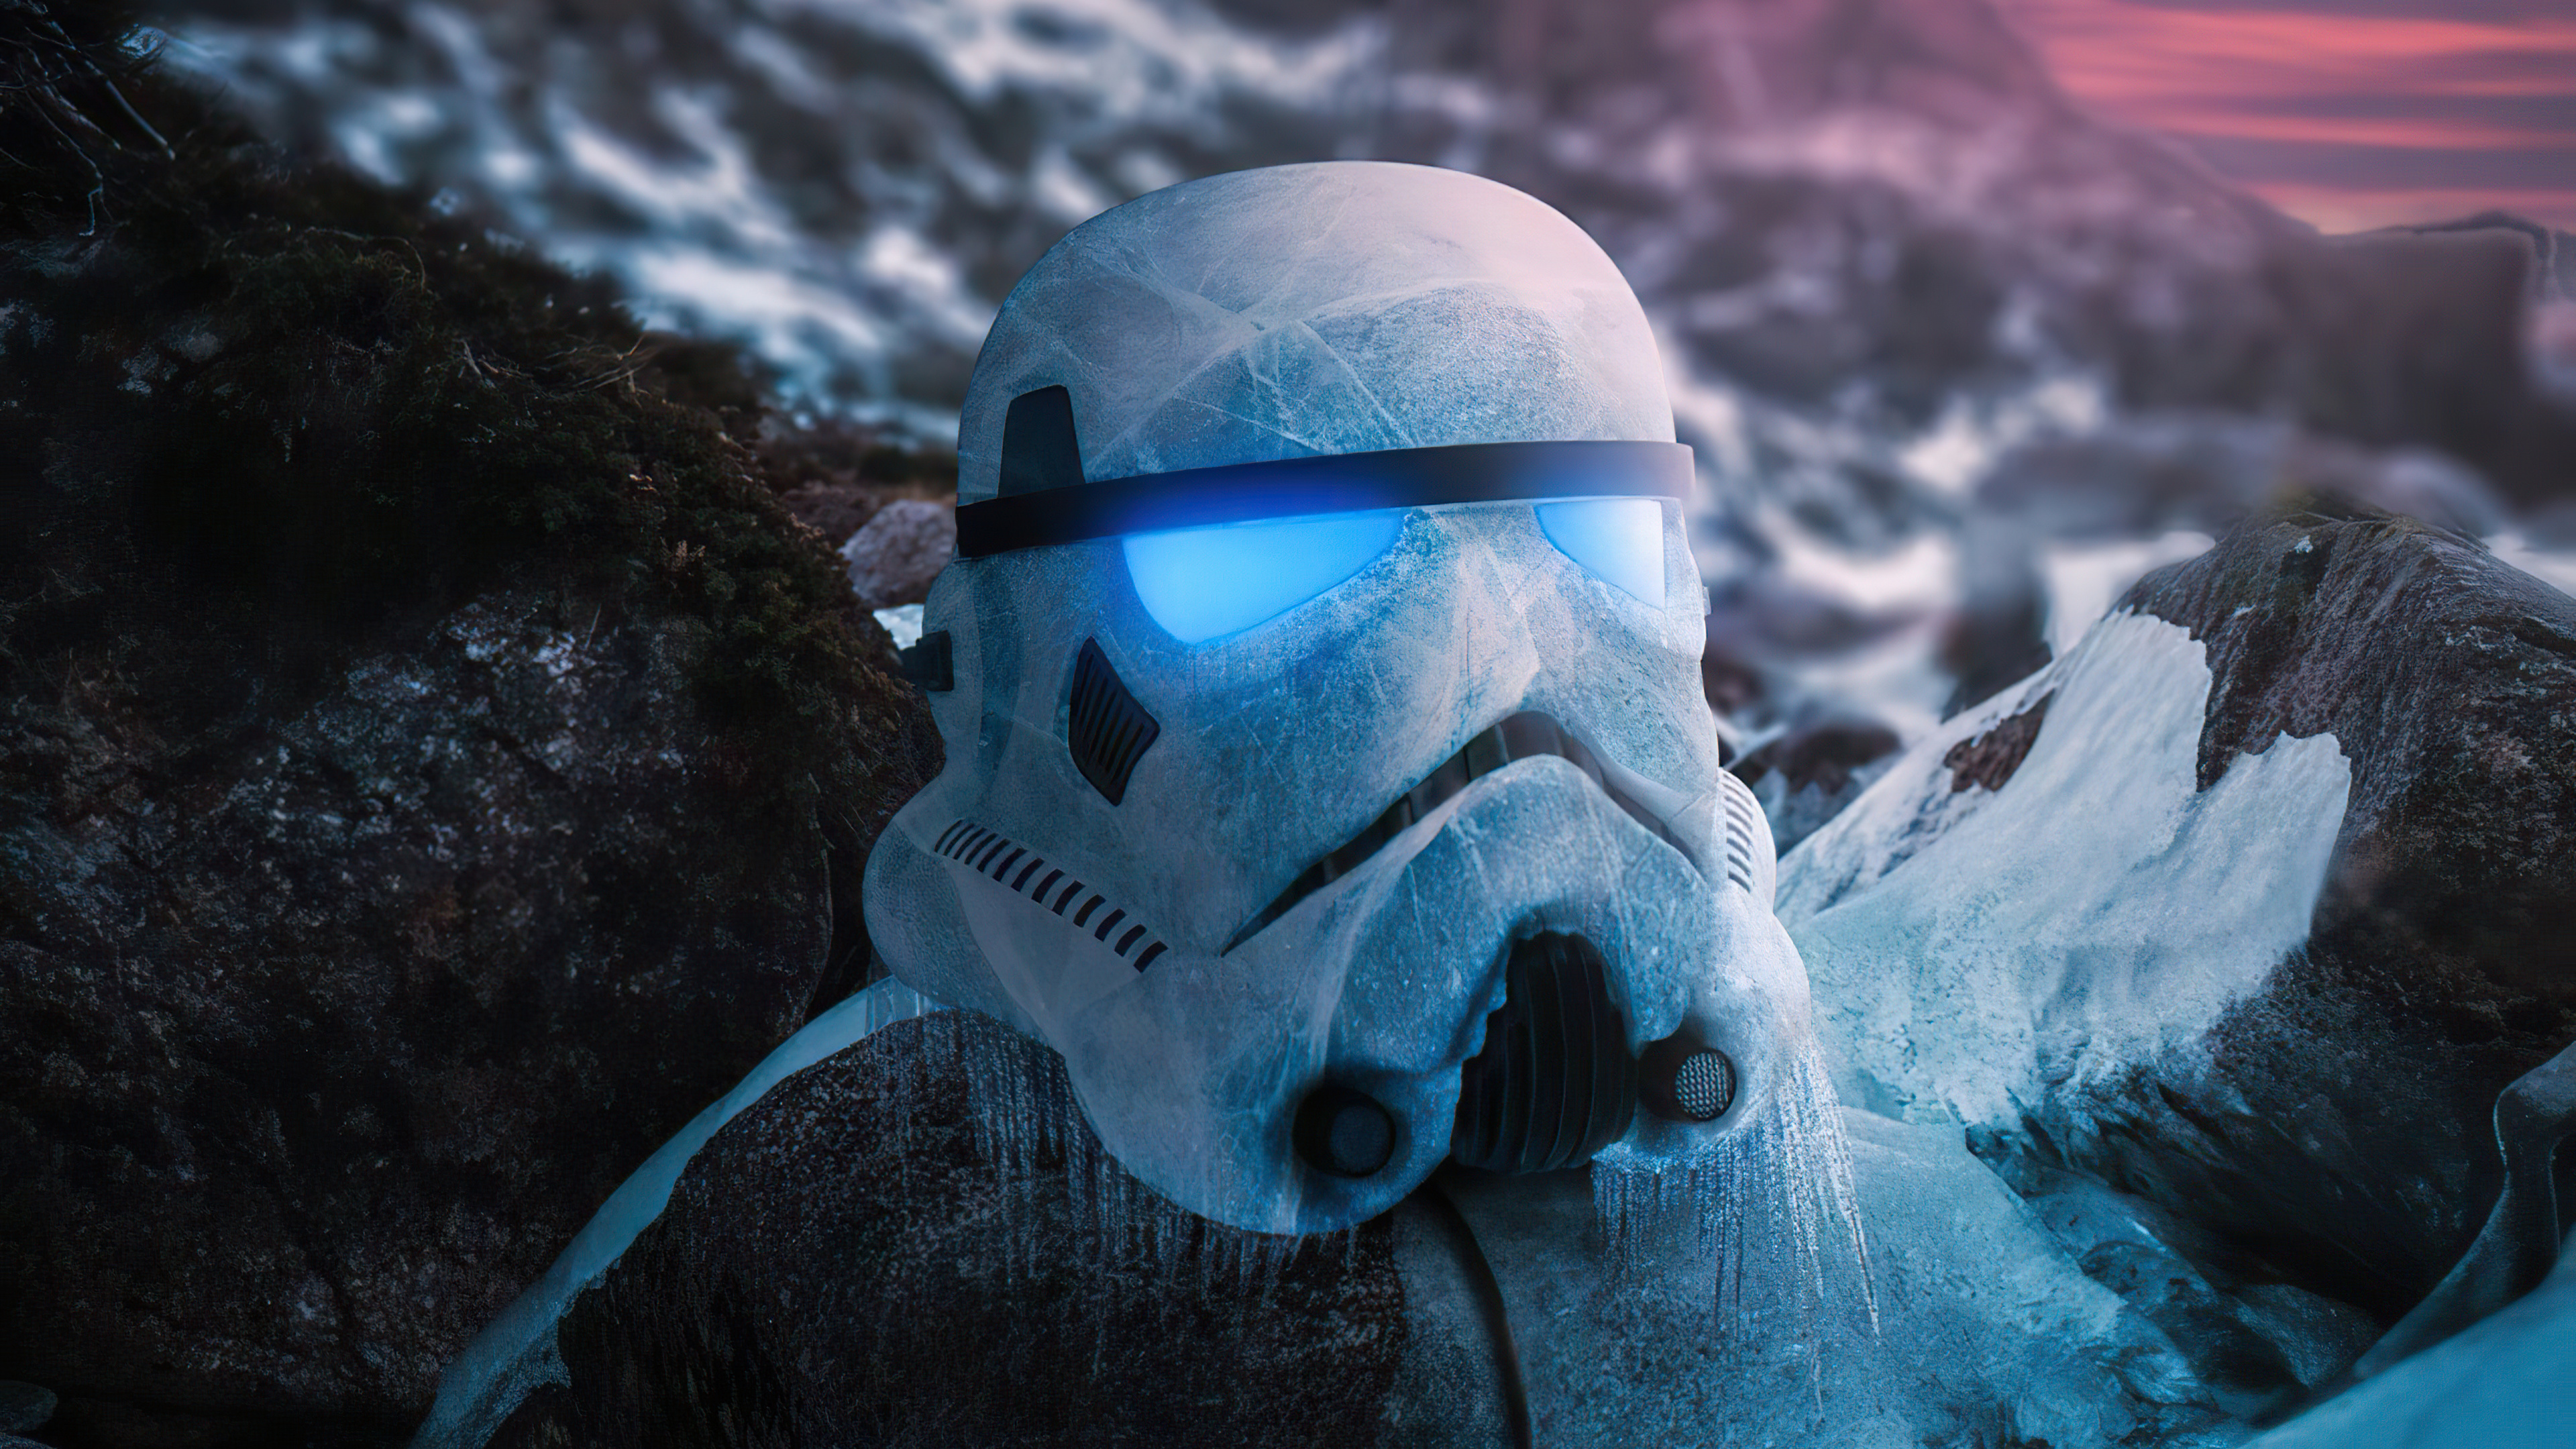 Star-Wars 4K wallpapers for your desktop or mobile screen free and easy to  download